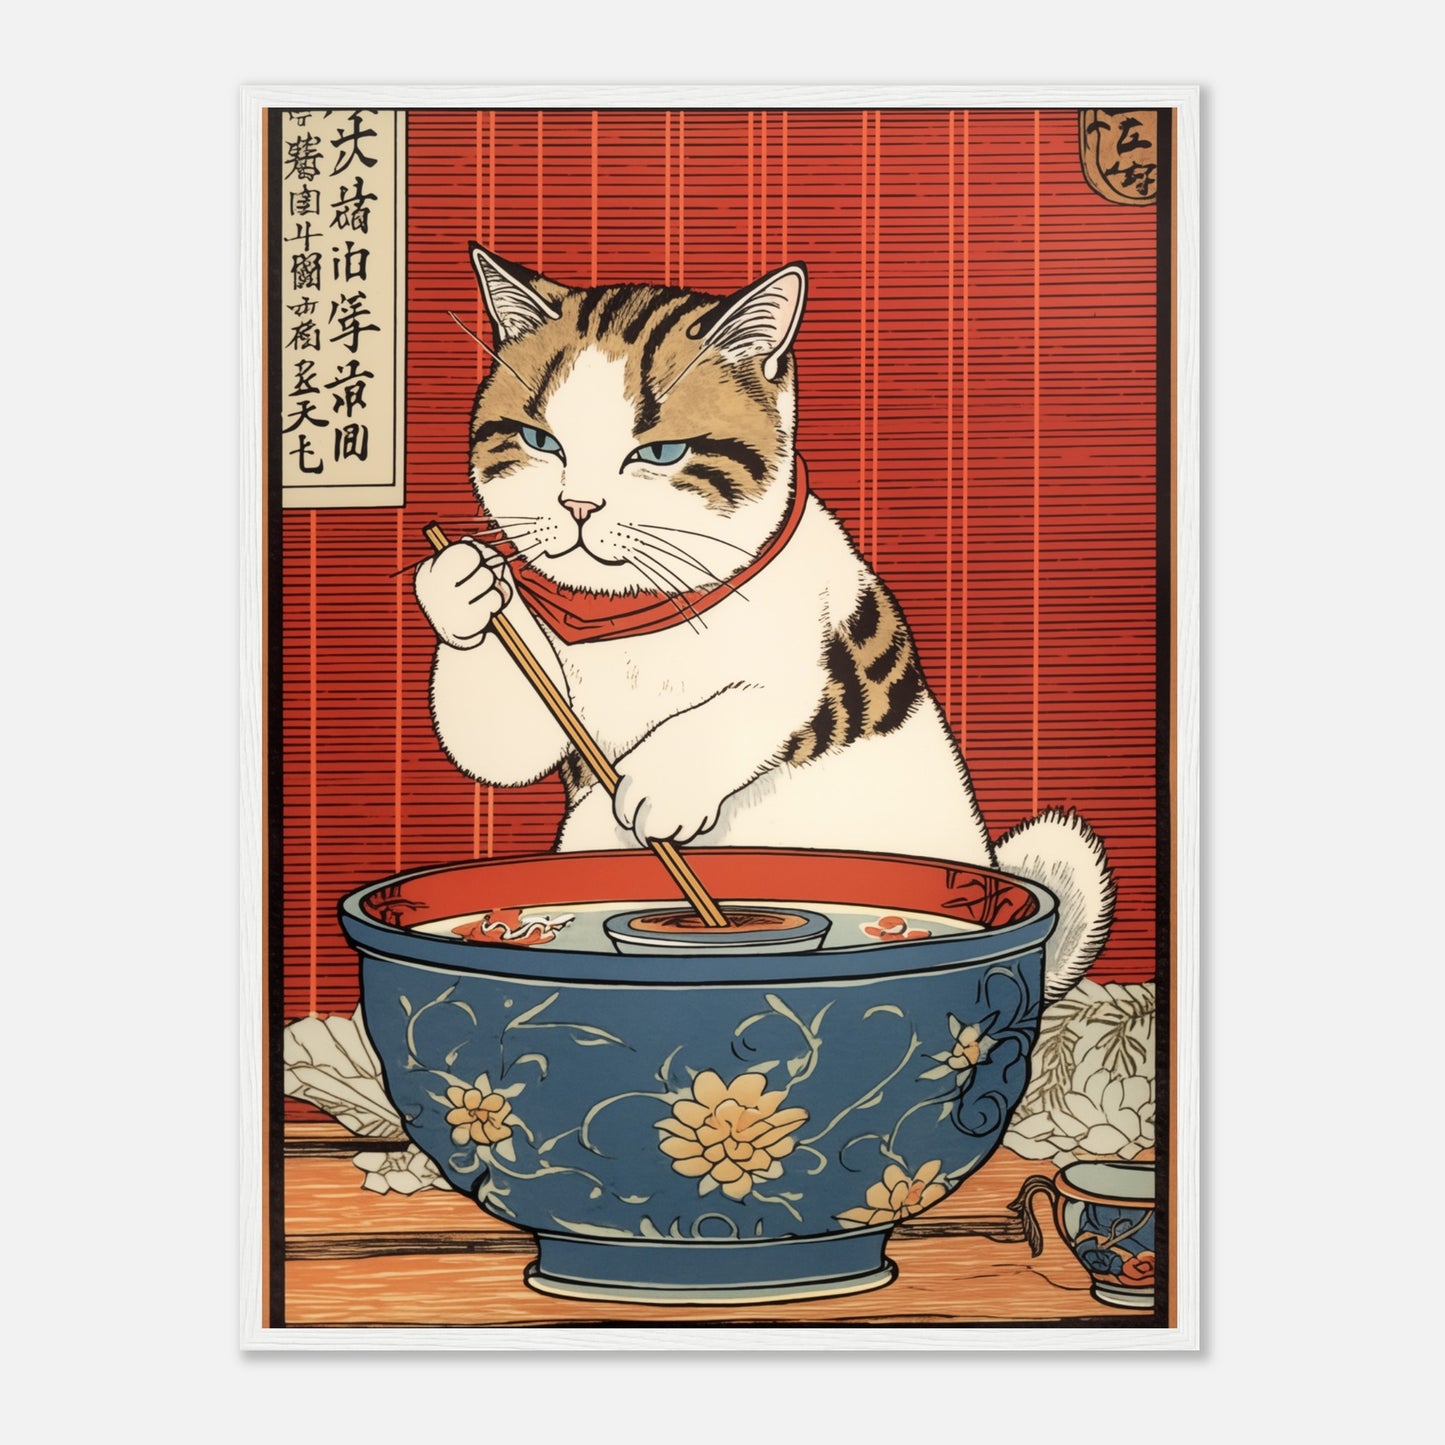 A traditional Japanese woodblock print of a cat eating from a bowl with chopsticks.